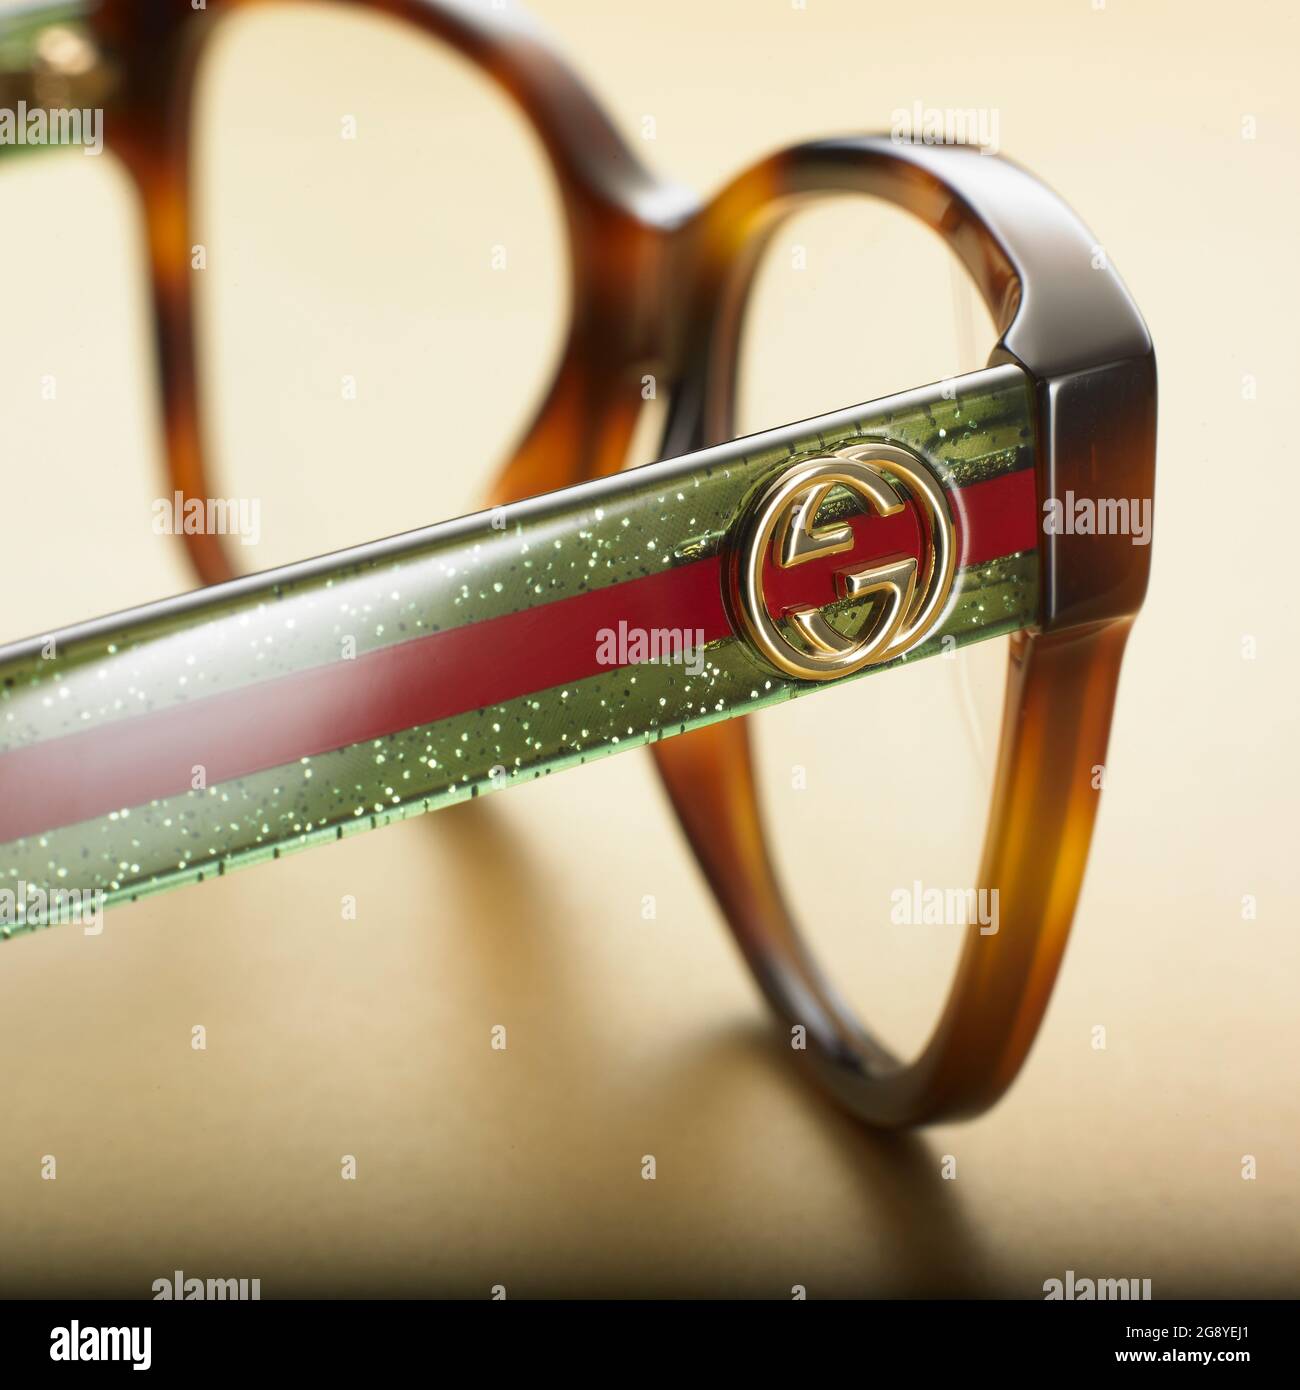 Gucci frames close up and side slightly the rear showing logo on side of frames. Selective focus Stock Photo - Alamy